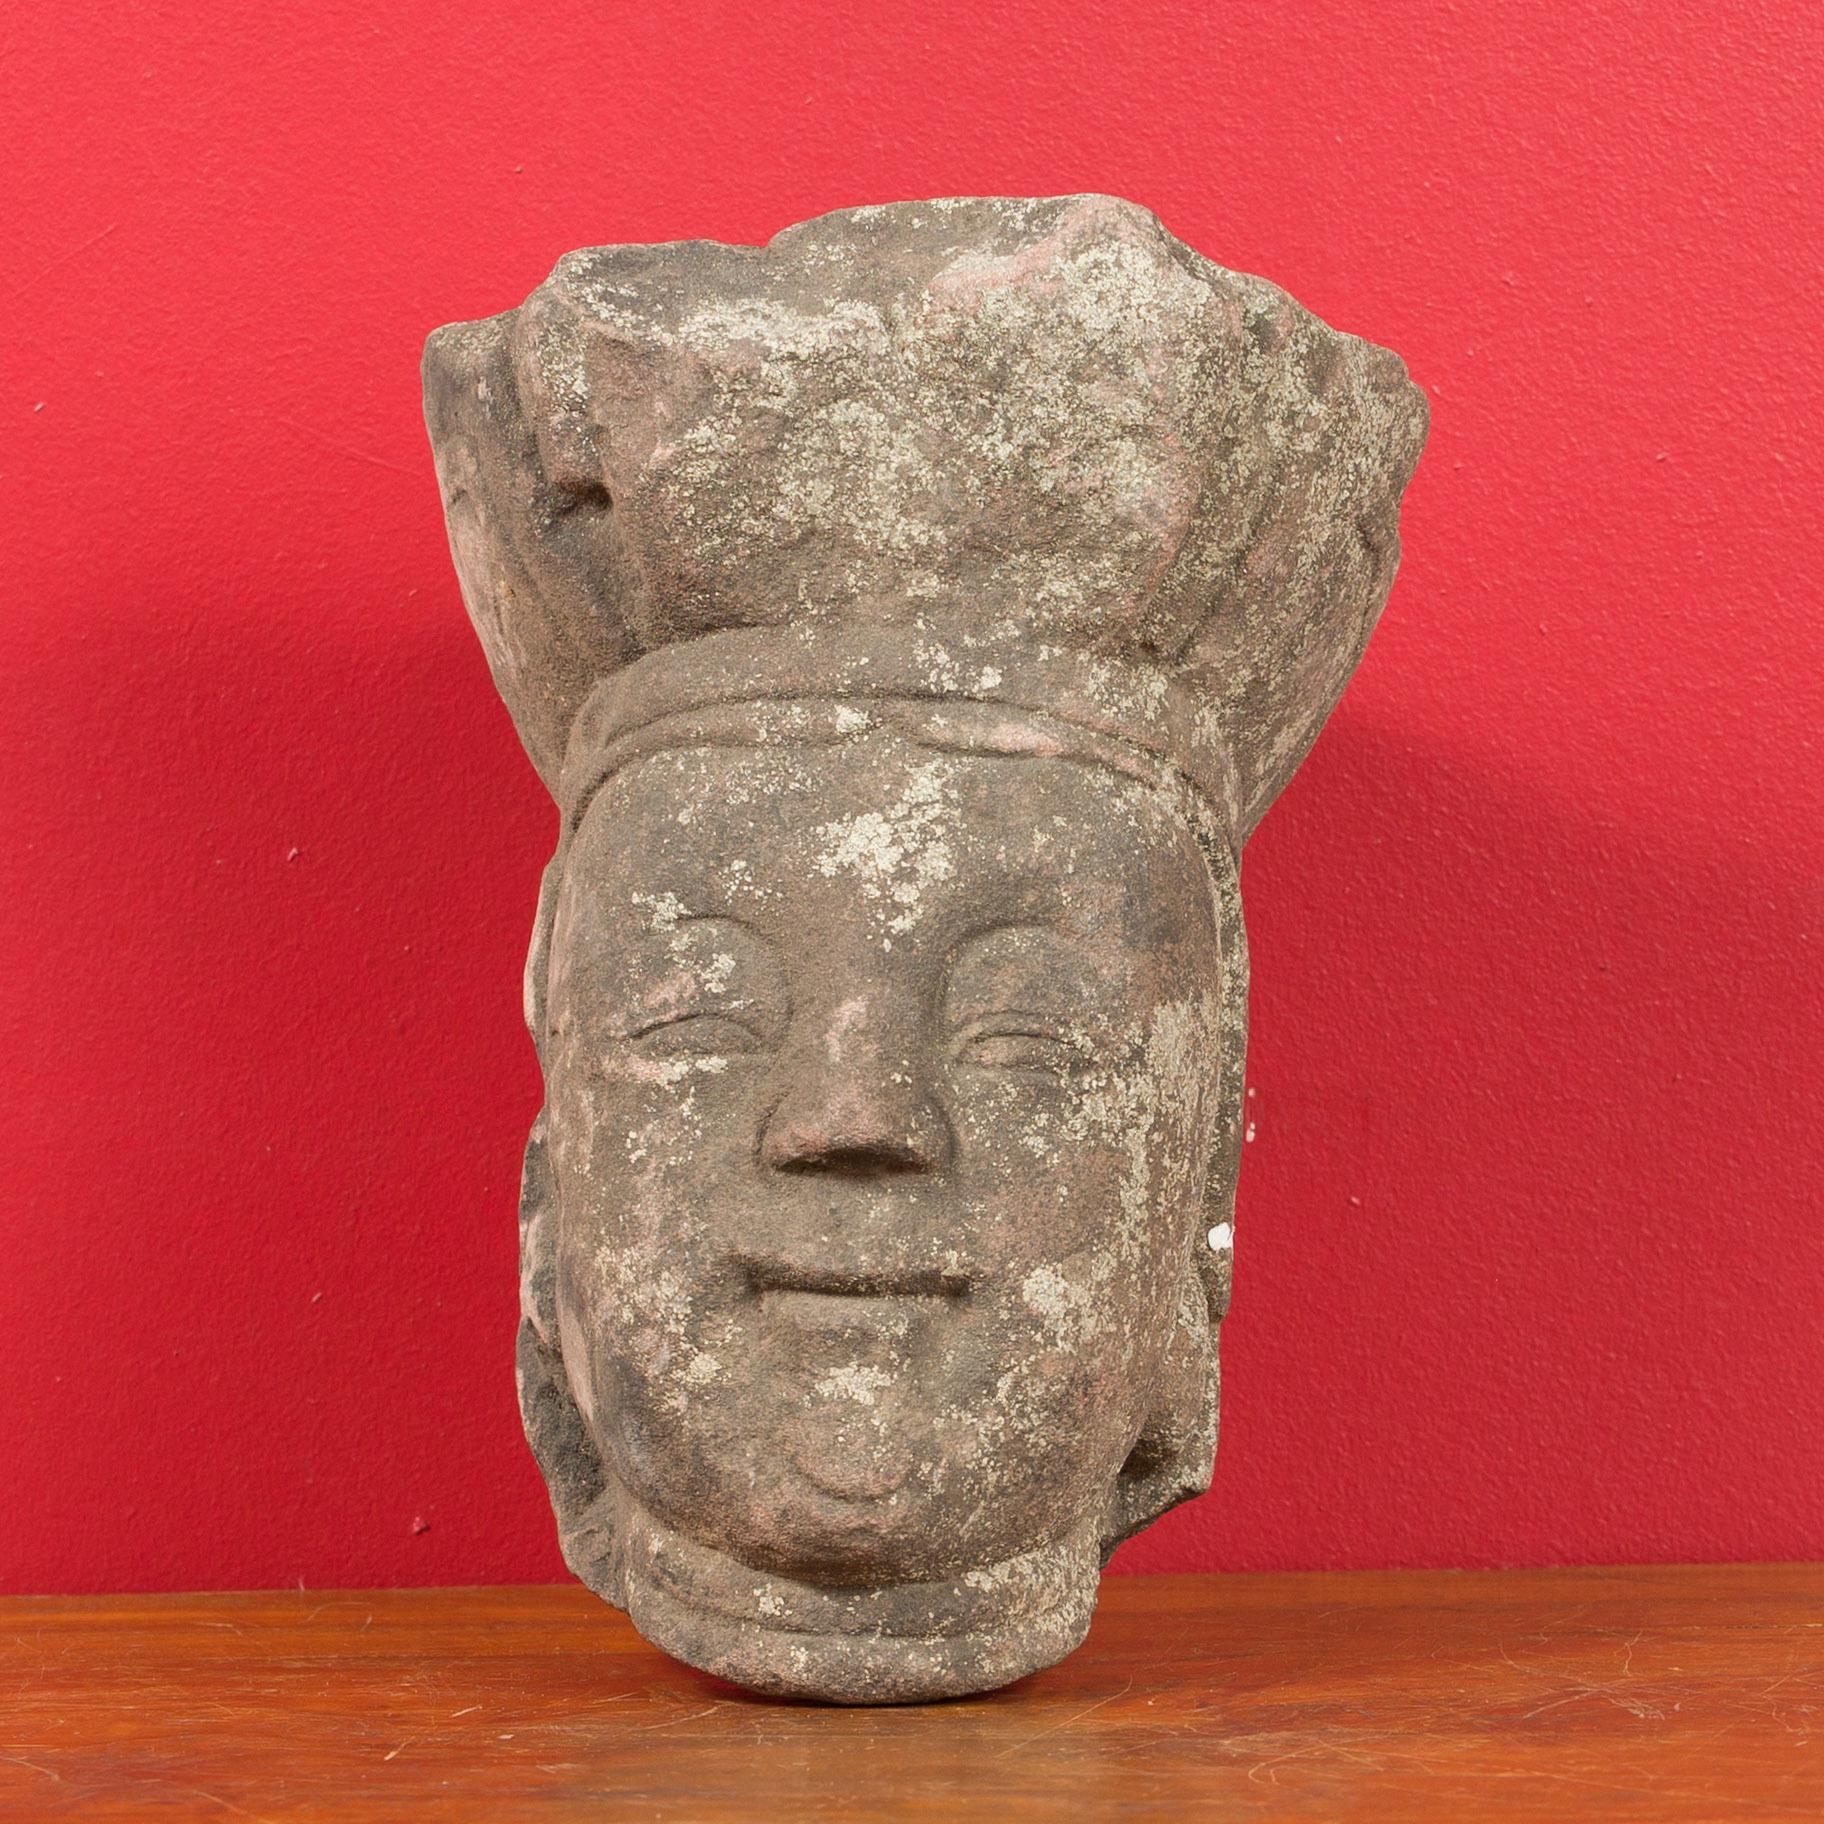 An antique Chinese carved stone head sculpture depicting a religious figure with nicely weathered appearance. Created in China, this carved stone sculpture will make for an excellent decorative object. Propped against a wall, the sculpture, likely